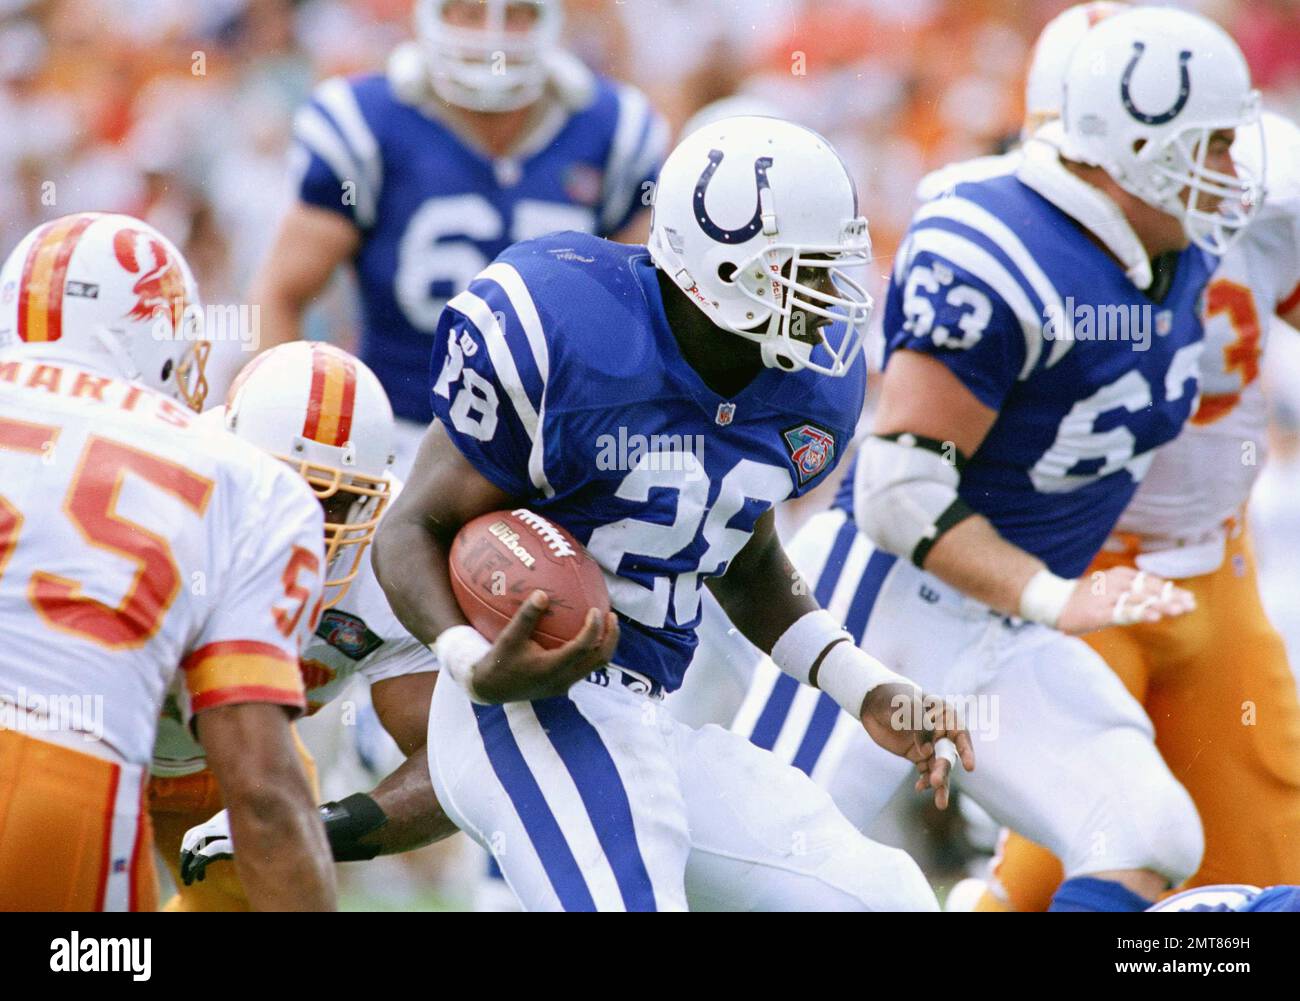 Indianapolis Colts running back Marshall Faulk (28) cuts through the Tampa  Bay Buccaneers defense during their game at Tampa Stadium, Sept. 11, 1994.  Faulk rushed for 104 yards and had 82 yards